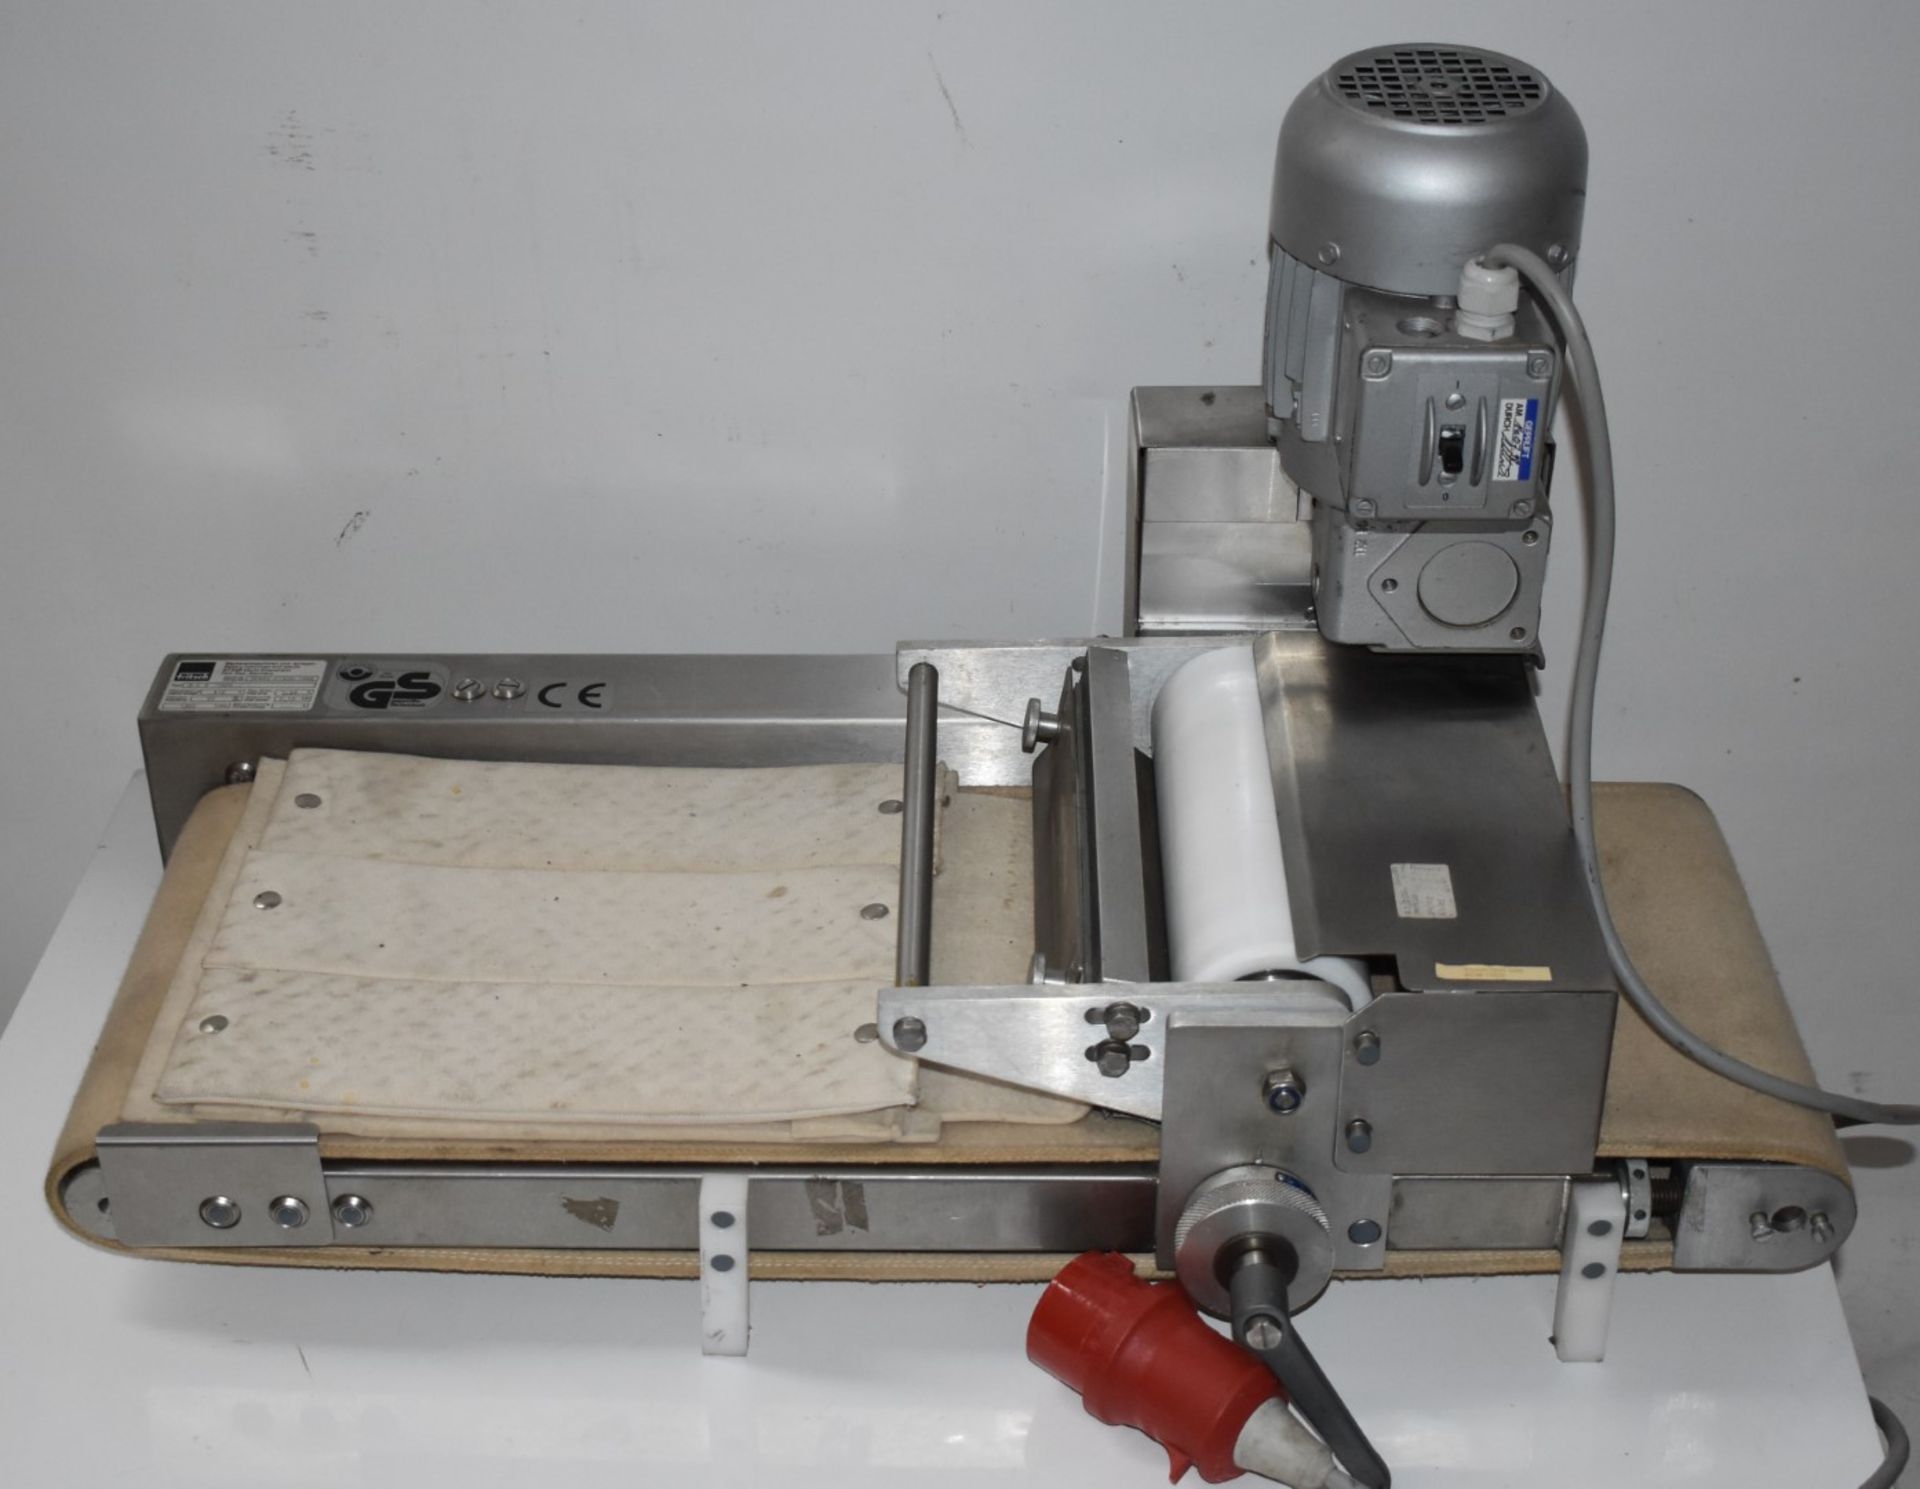 1 x Fritsch BCW 1000 Croissant Countertop Roller- W82 x D50 cms - CL011 - Ref Ref259 - Location: